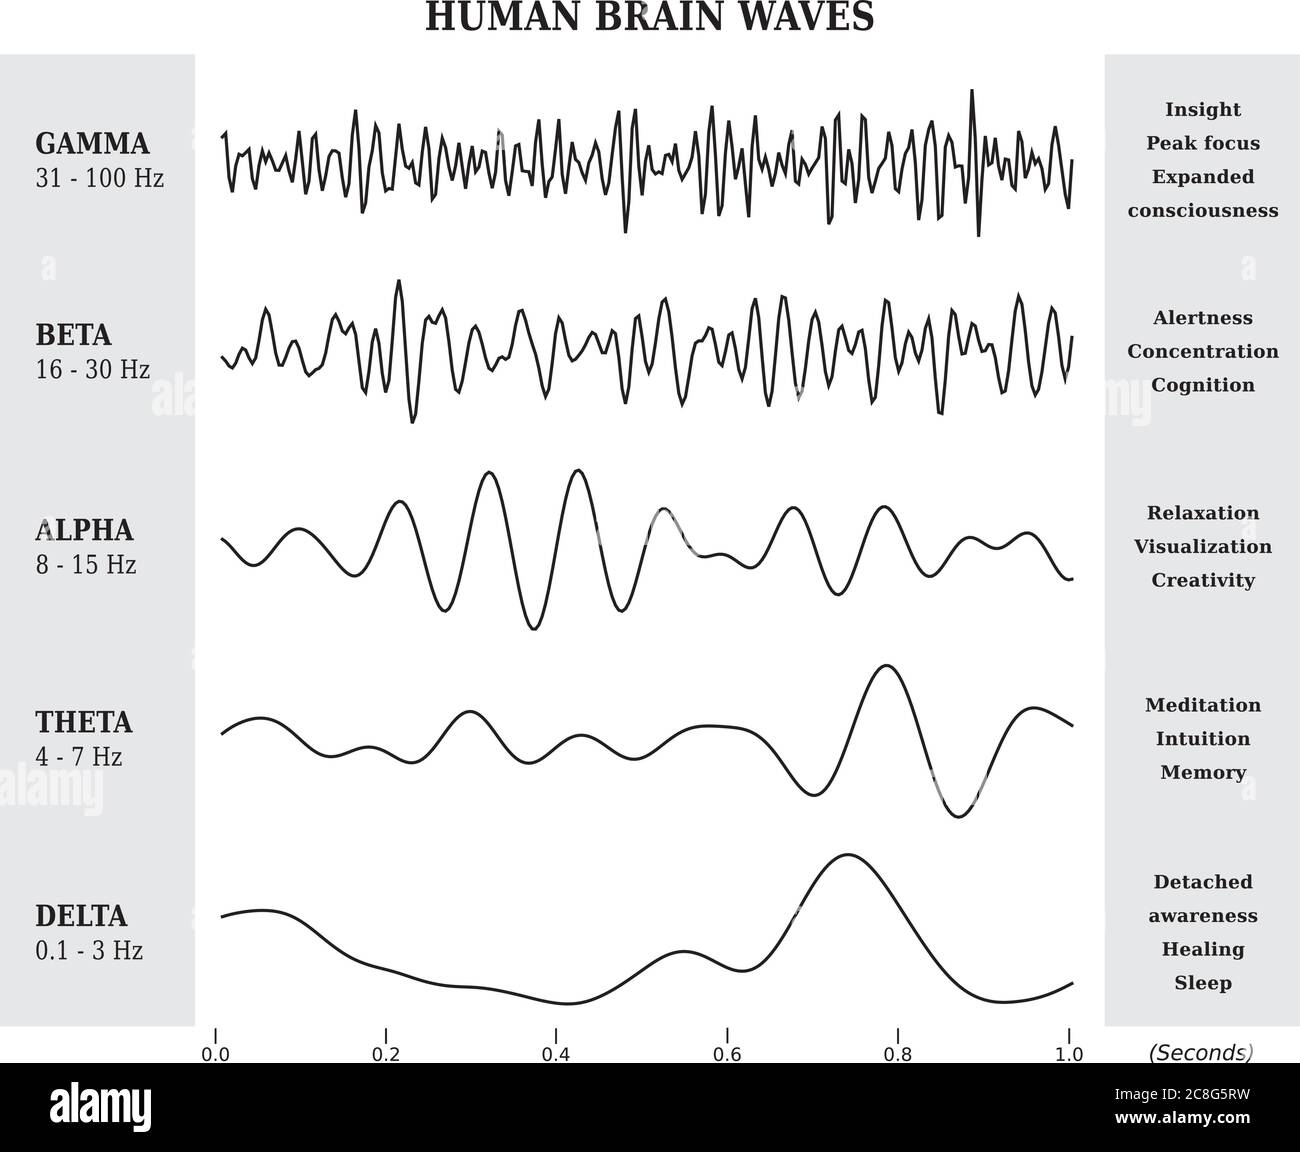 Human Brain Waves Diagram / Chart / Illustration in Black and White / English Language Stock Vector